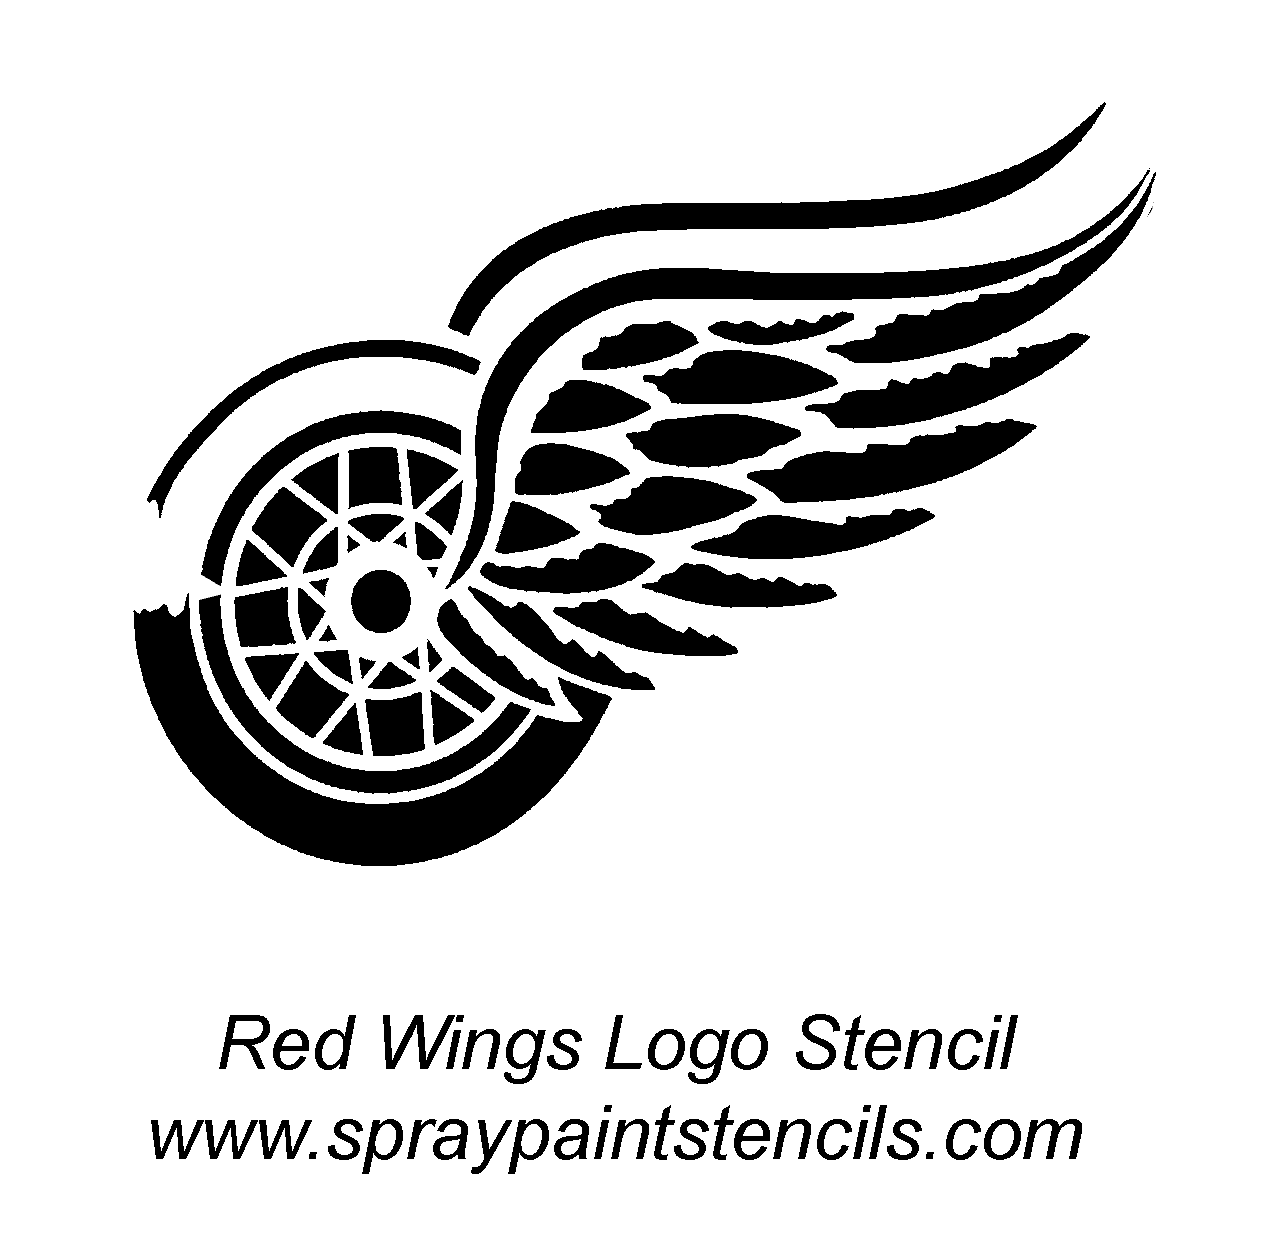 Black and White Detroit Red Wings Logo - Pin by Annette Mackinnon (Torres) on My Redwings | Detroit Red Wings ...